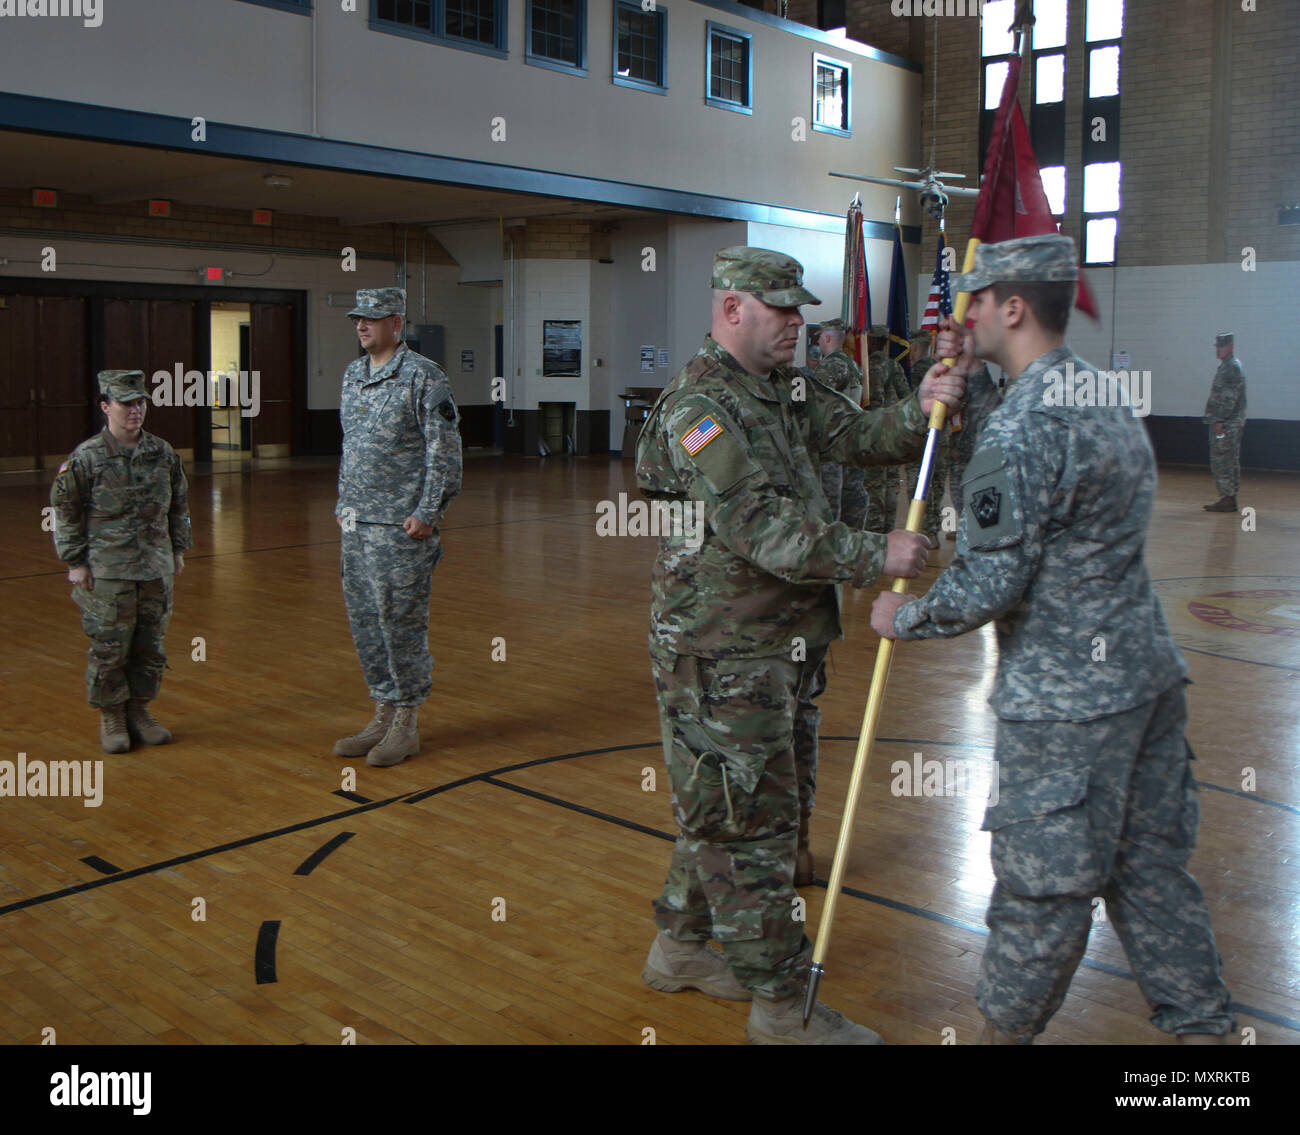 1st Sgt. Chad Schell (second from right) of the 108th Medical Company presents the newly unfurled colors of his unit to Spc. Bradley Wanamaker (right), a medic, during the activation ceremony for the 108th November 6 in Allentown, Pa. Lt. Col. Laura McHugh (left), commander of the 213th RSG and Maj. Daniel S. Wise, commander of the 108th Medical Company conferred their trust on the new unit to provide area medical support. (U.S. Army National Guard photo by Sgt. Zane Craig) Stock Photo